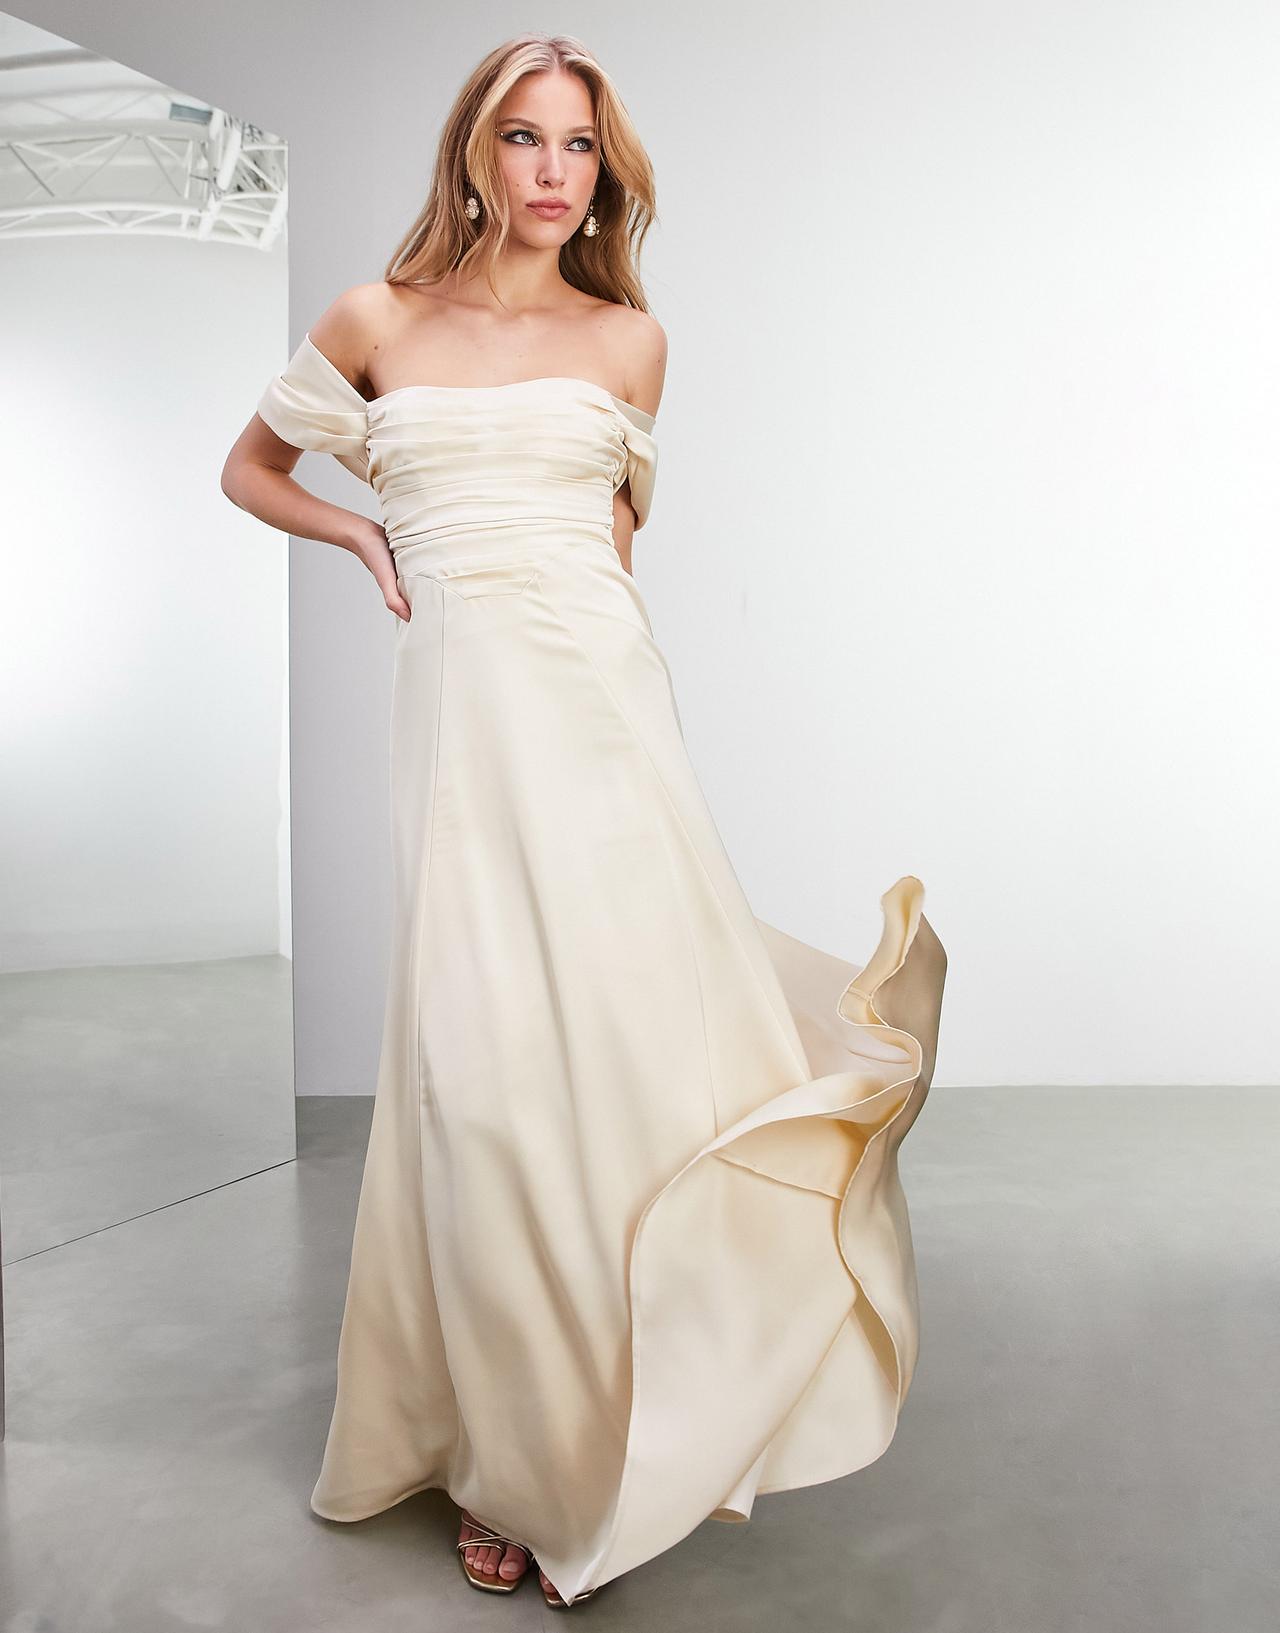 Model wearing an off the shoulder Champagne ombre wedding dress